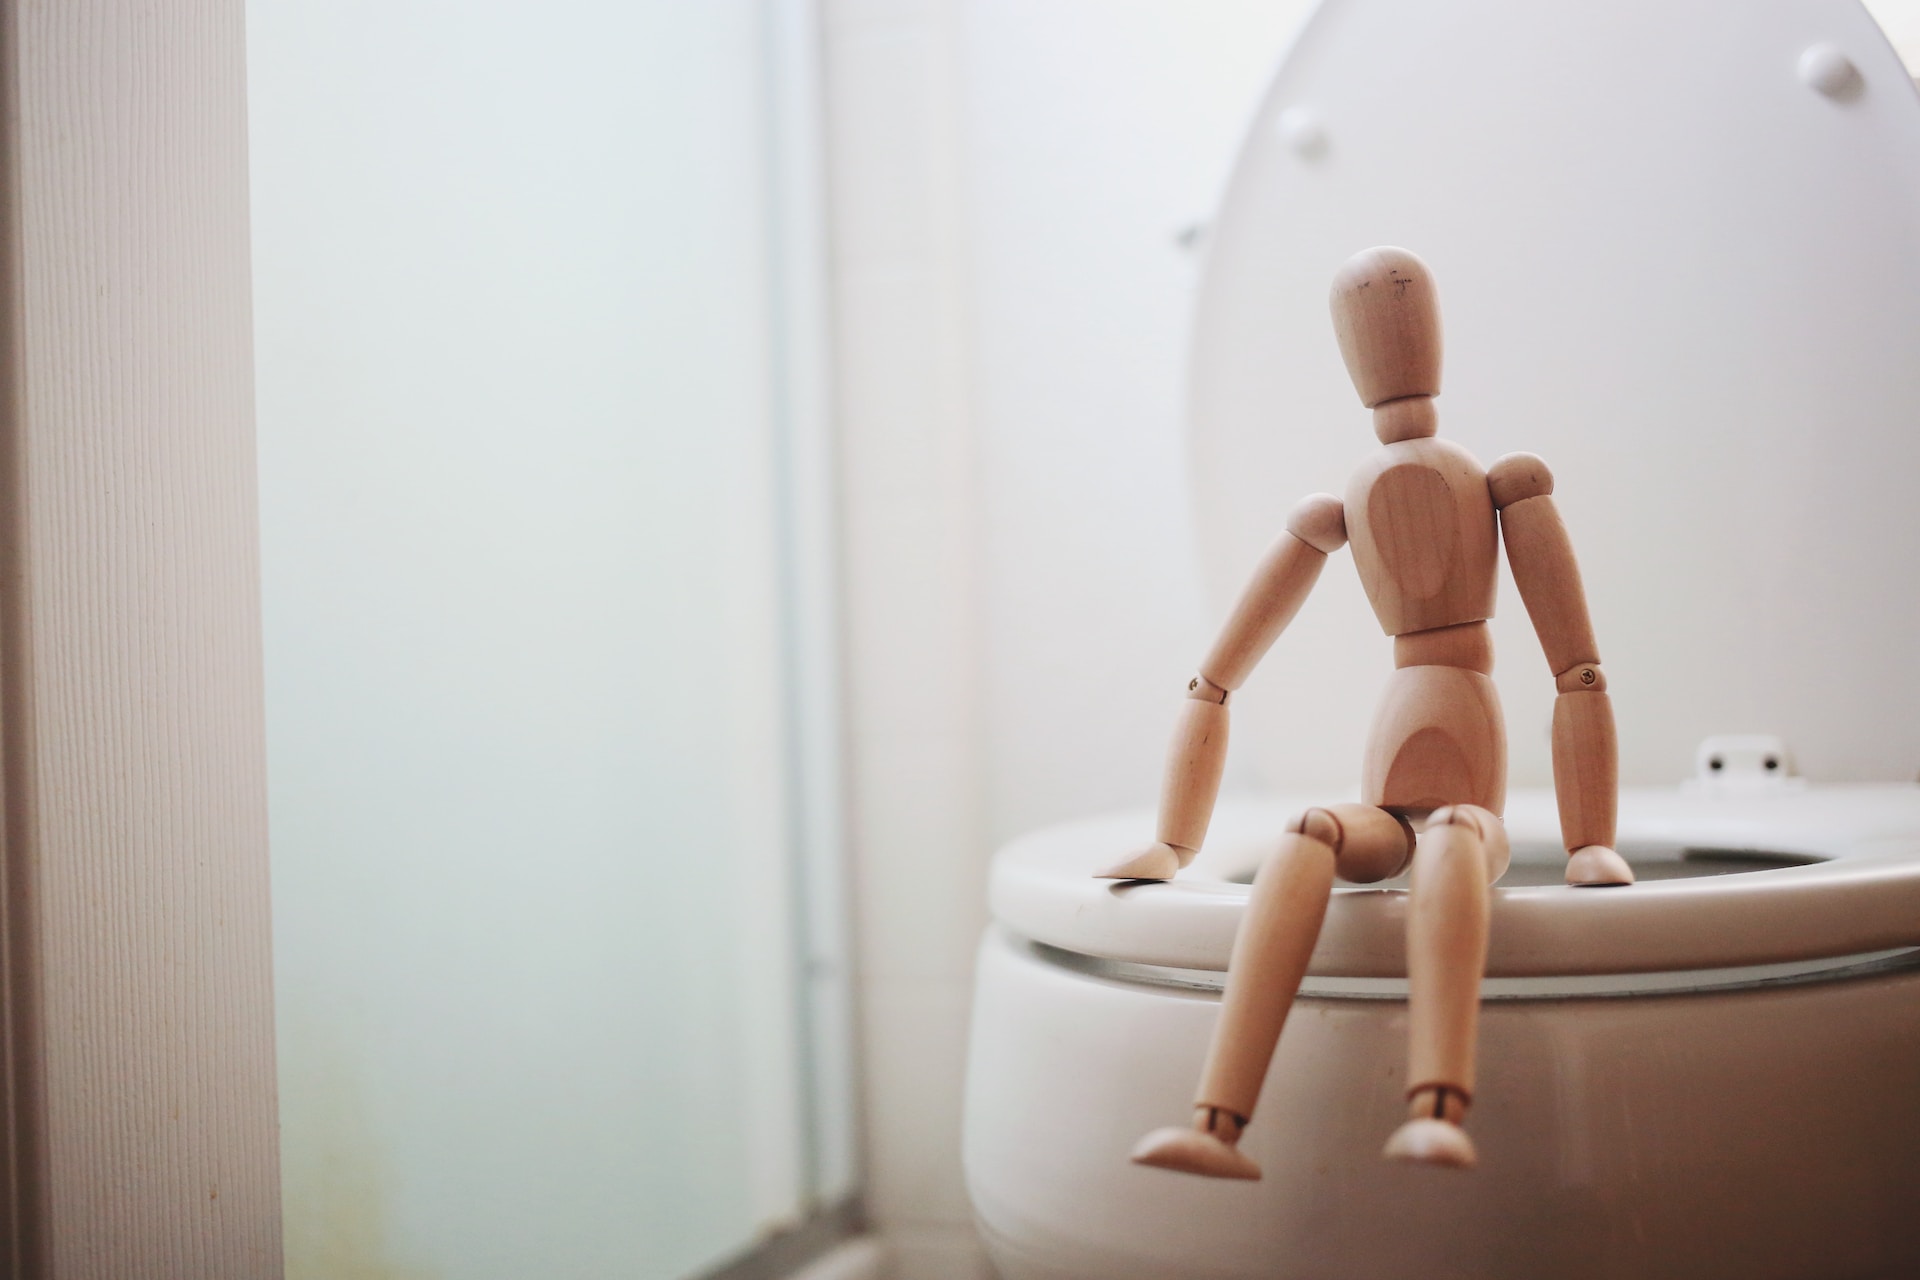 Around 16% of Americans are constipated